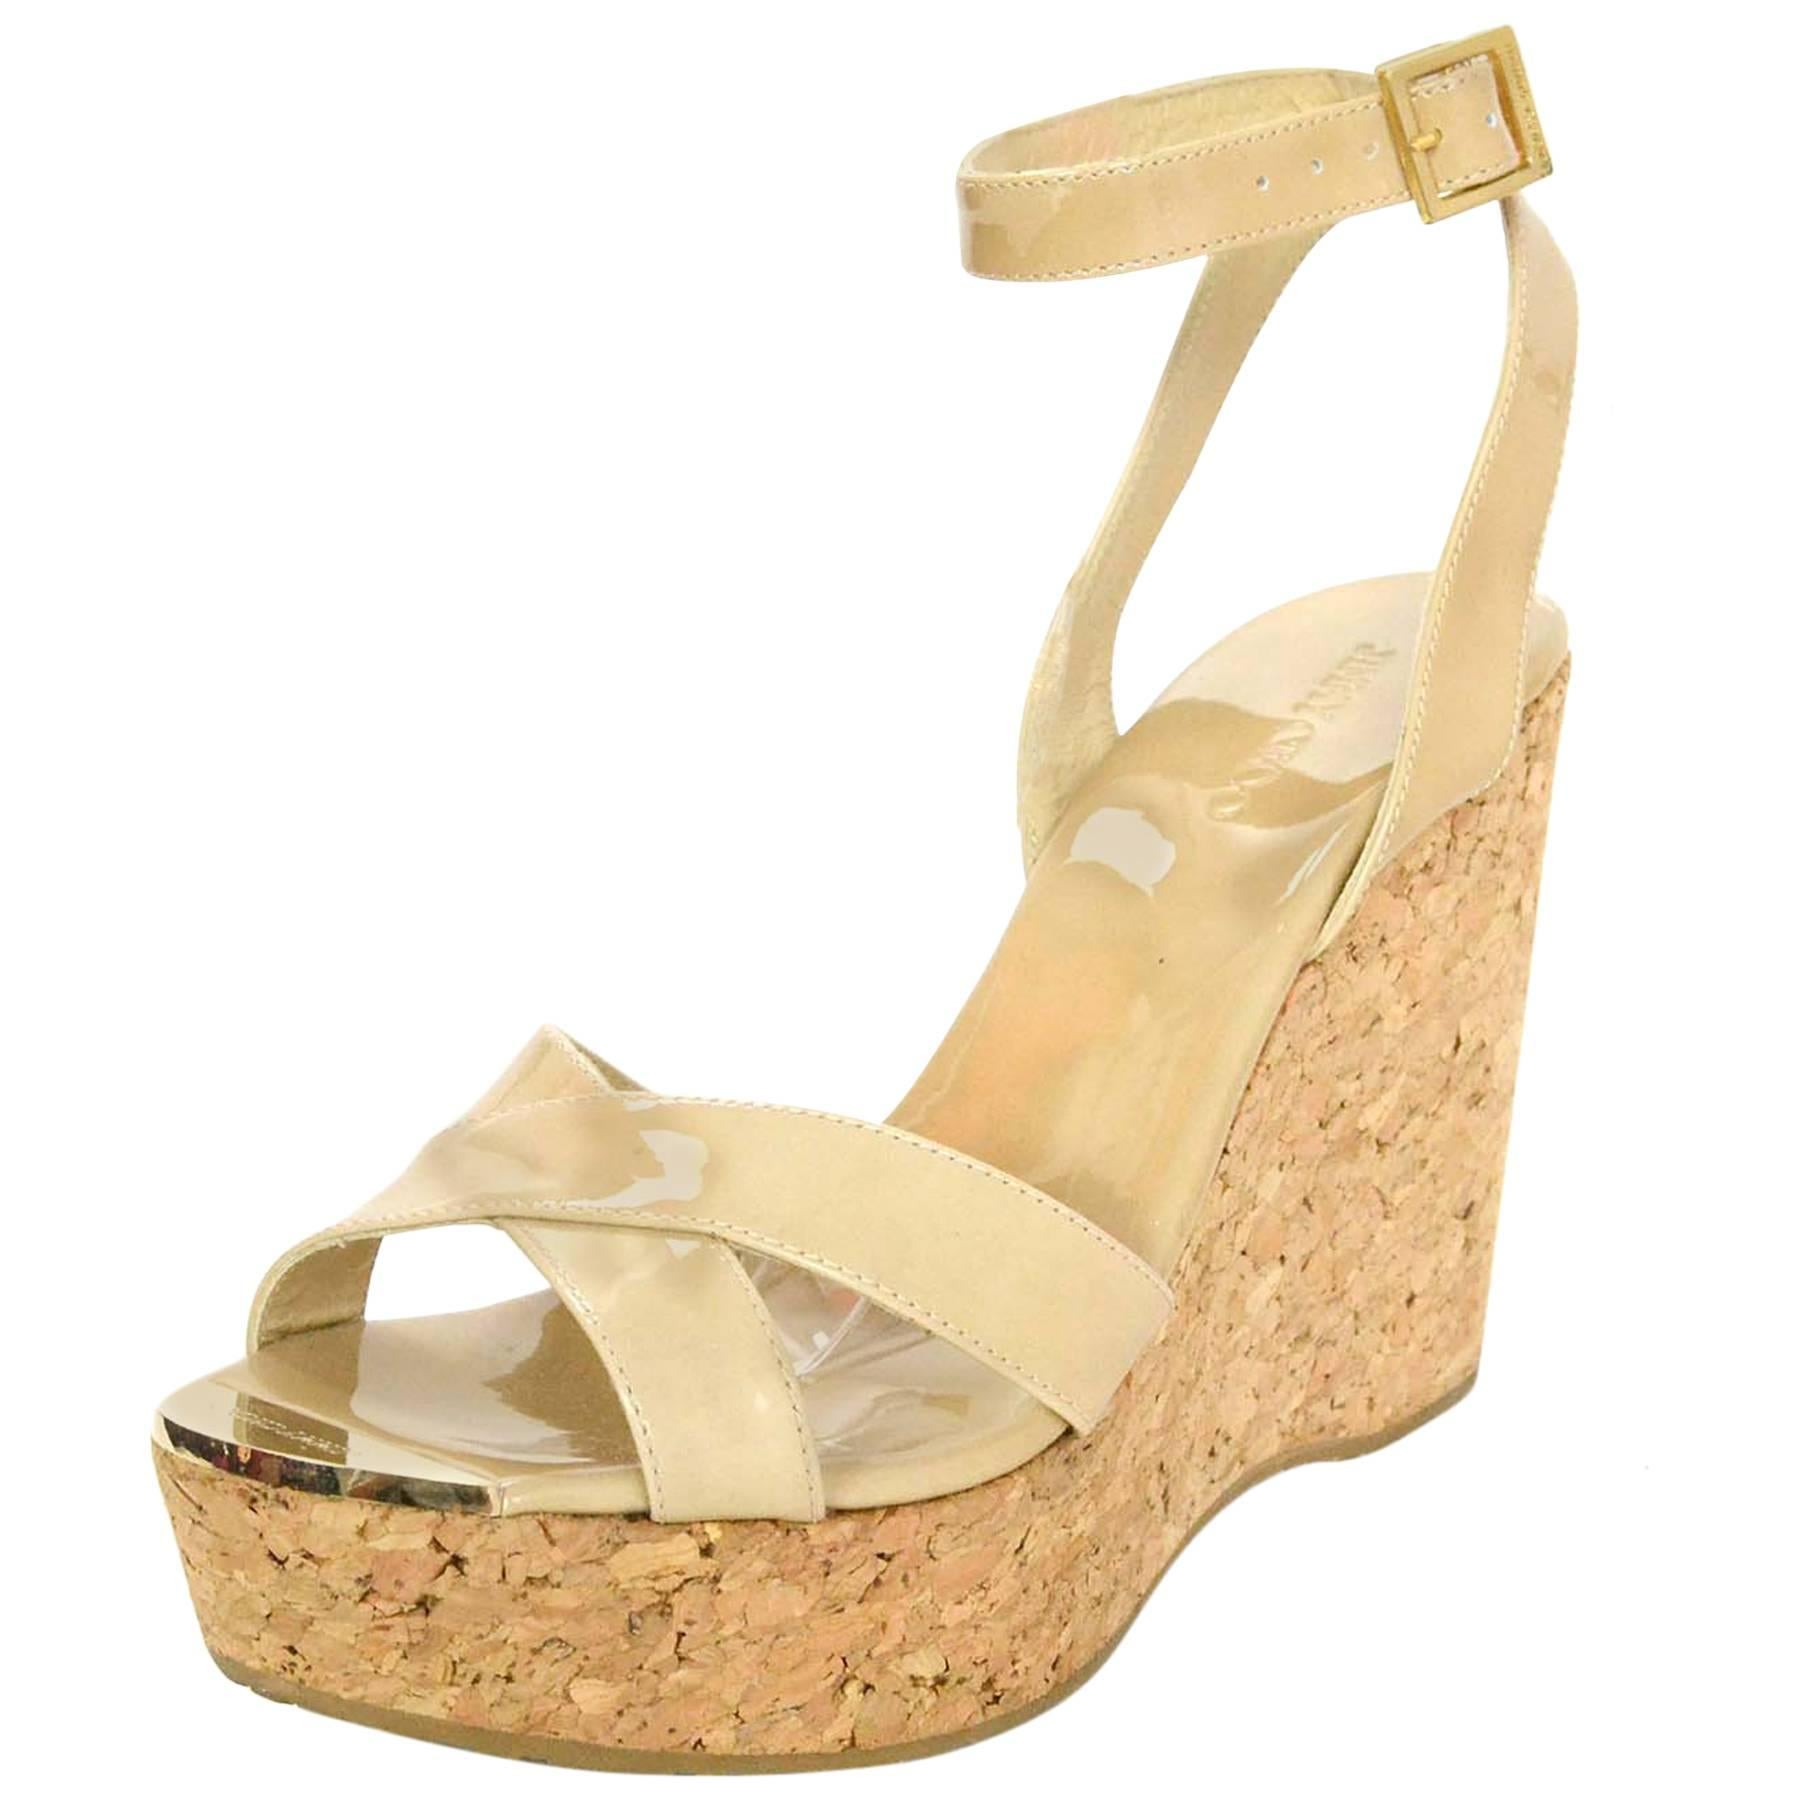 Jimmy Choo Patent Leather Nude and Cork Wedges Sz 39